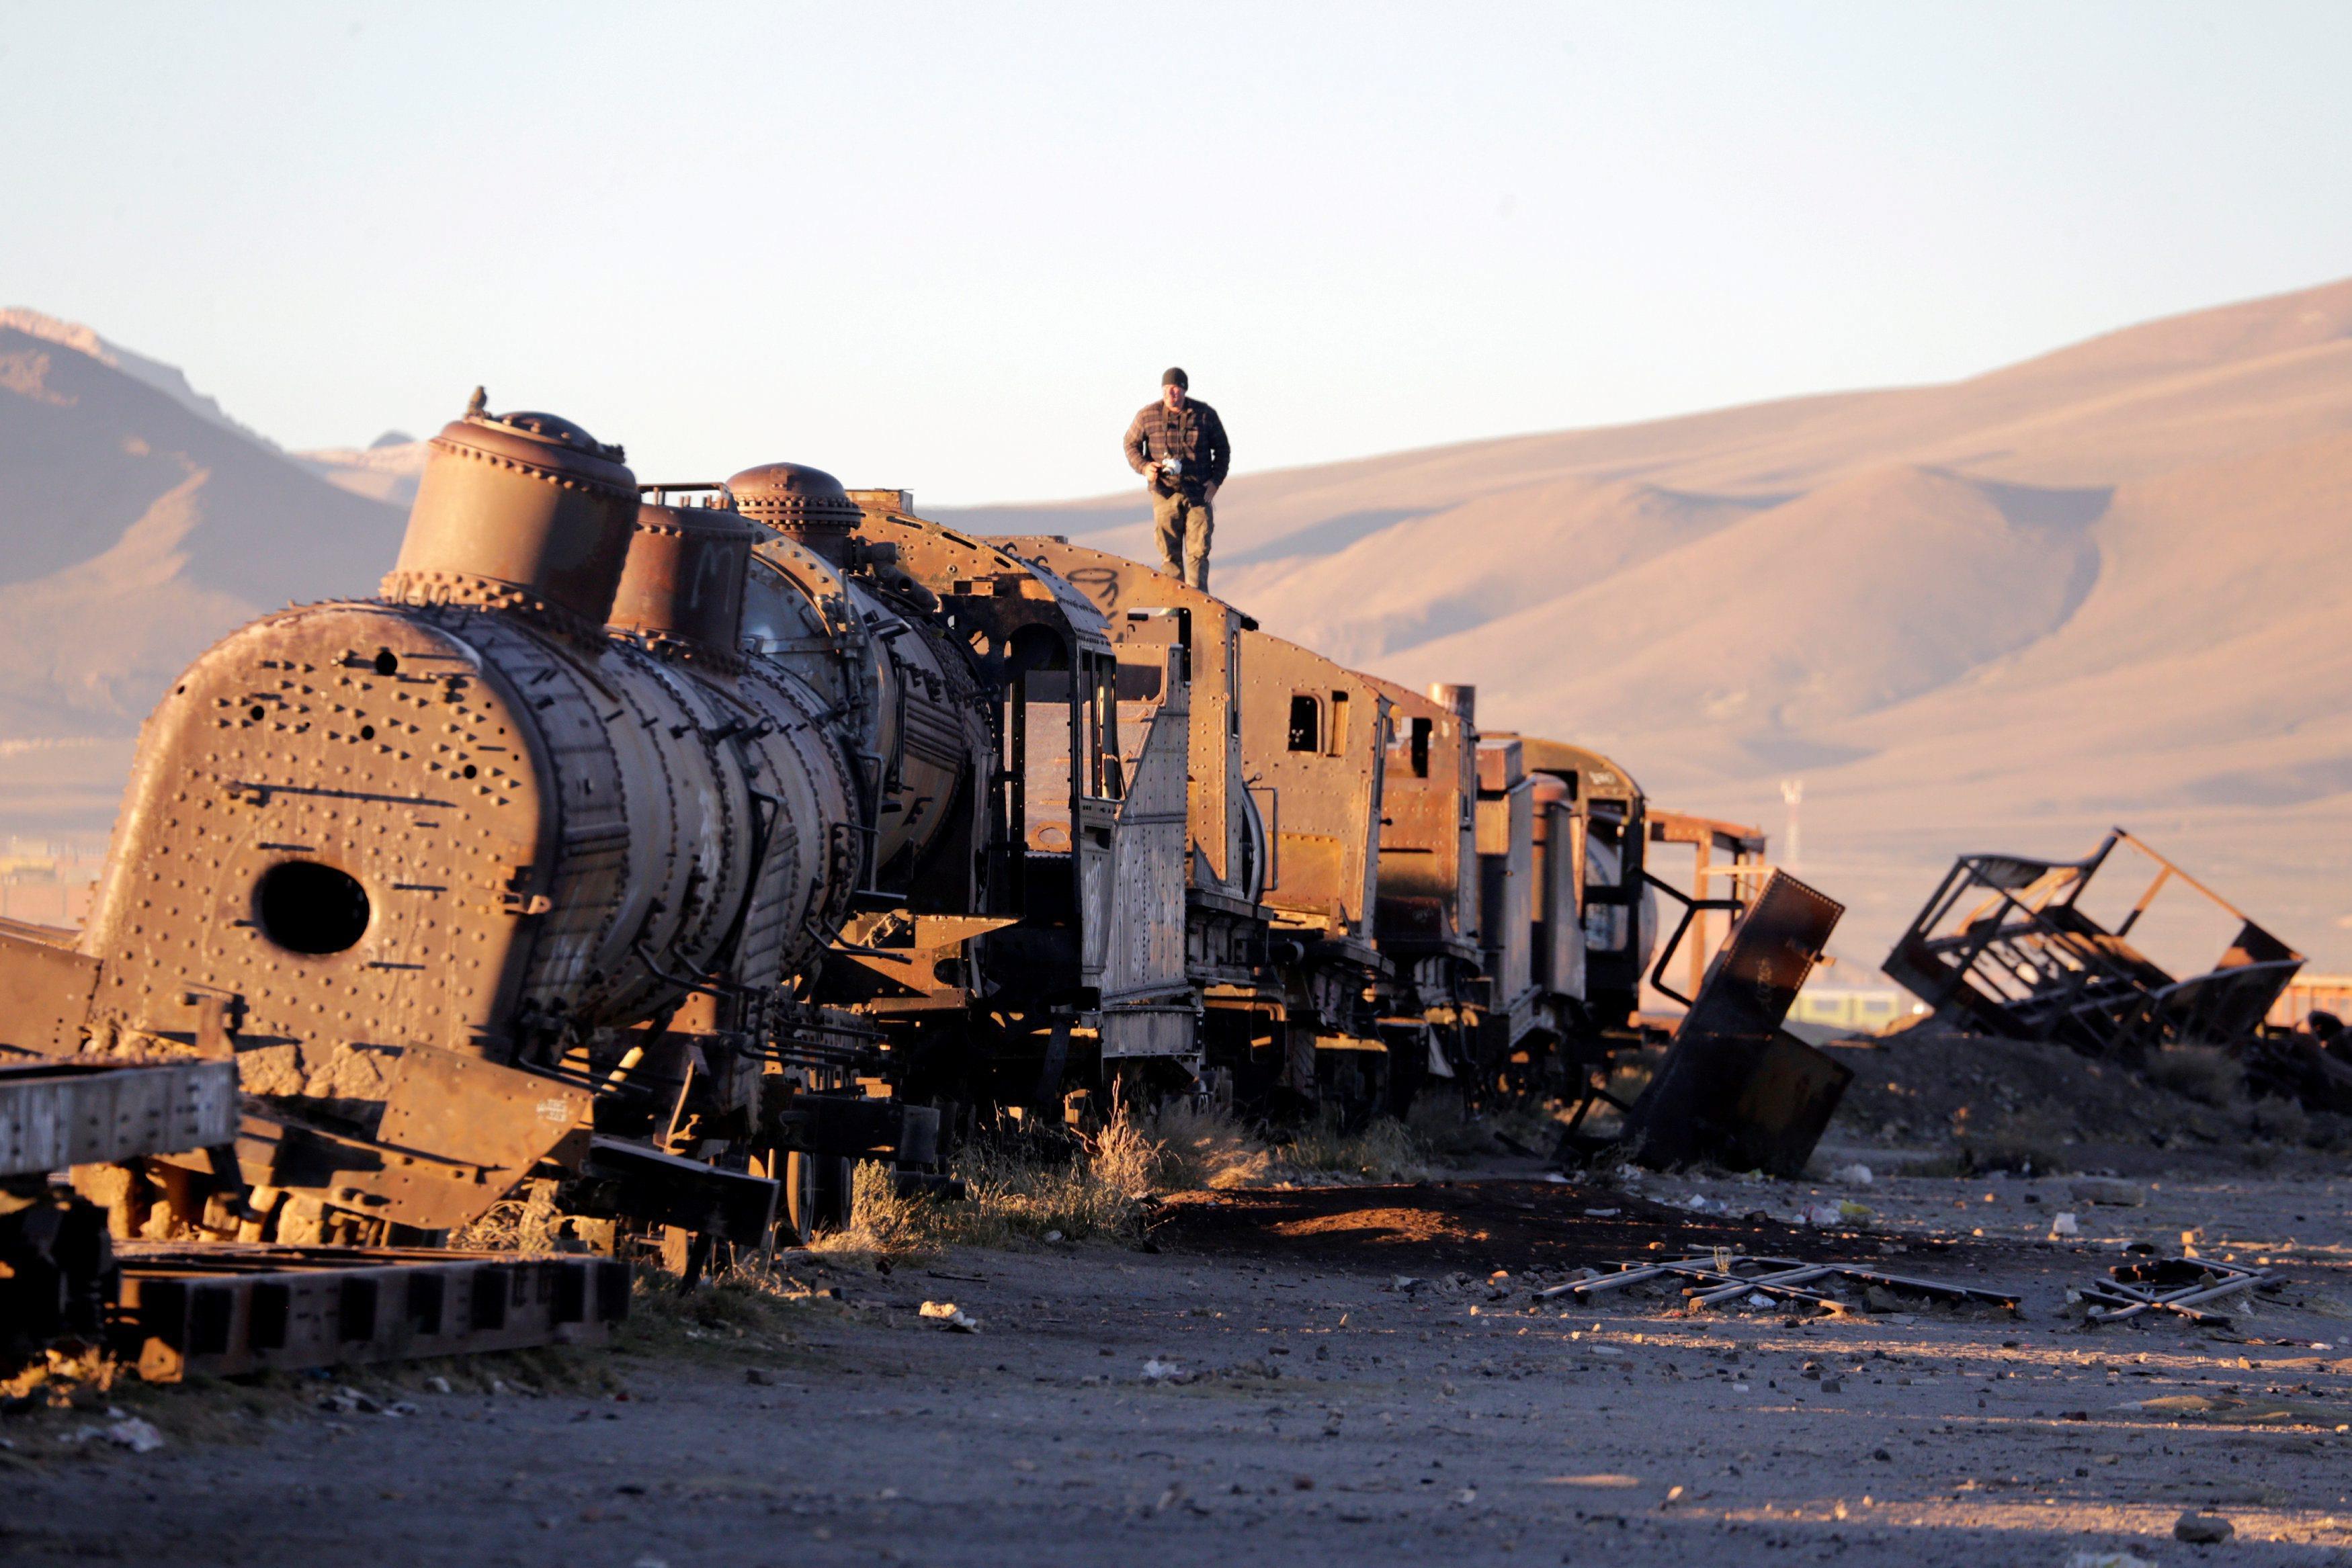 A man stands on an old train of Bolivian Railways Company from 1870-1900 at the train cemetery in Uy